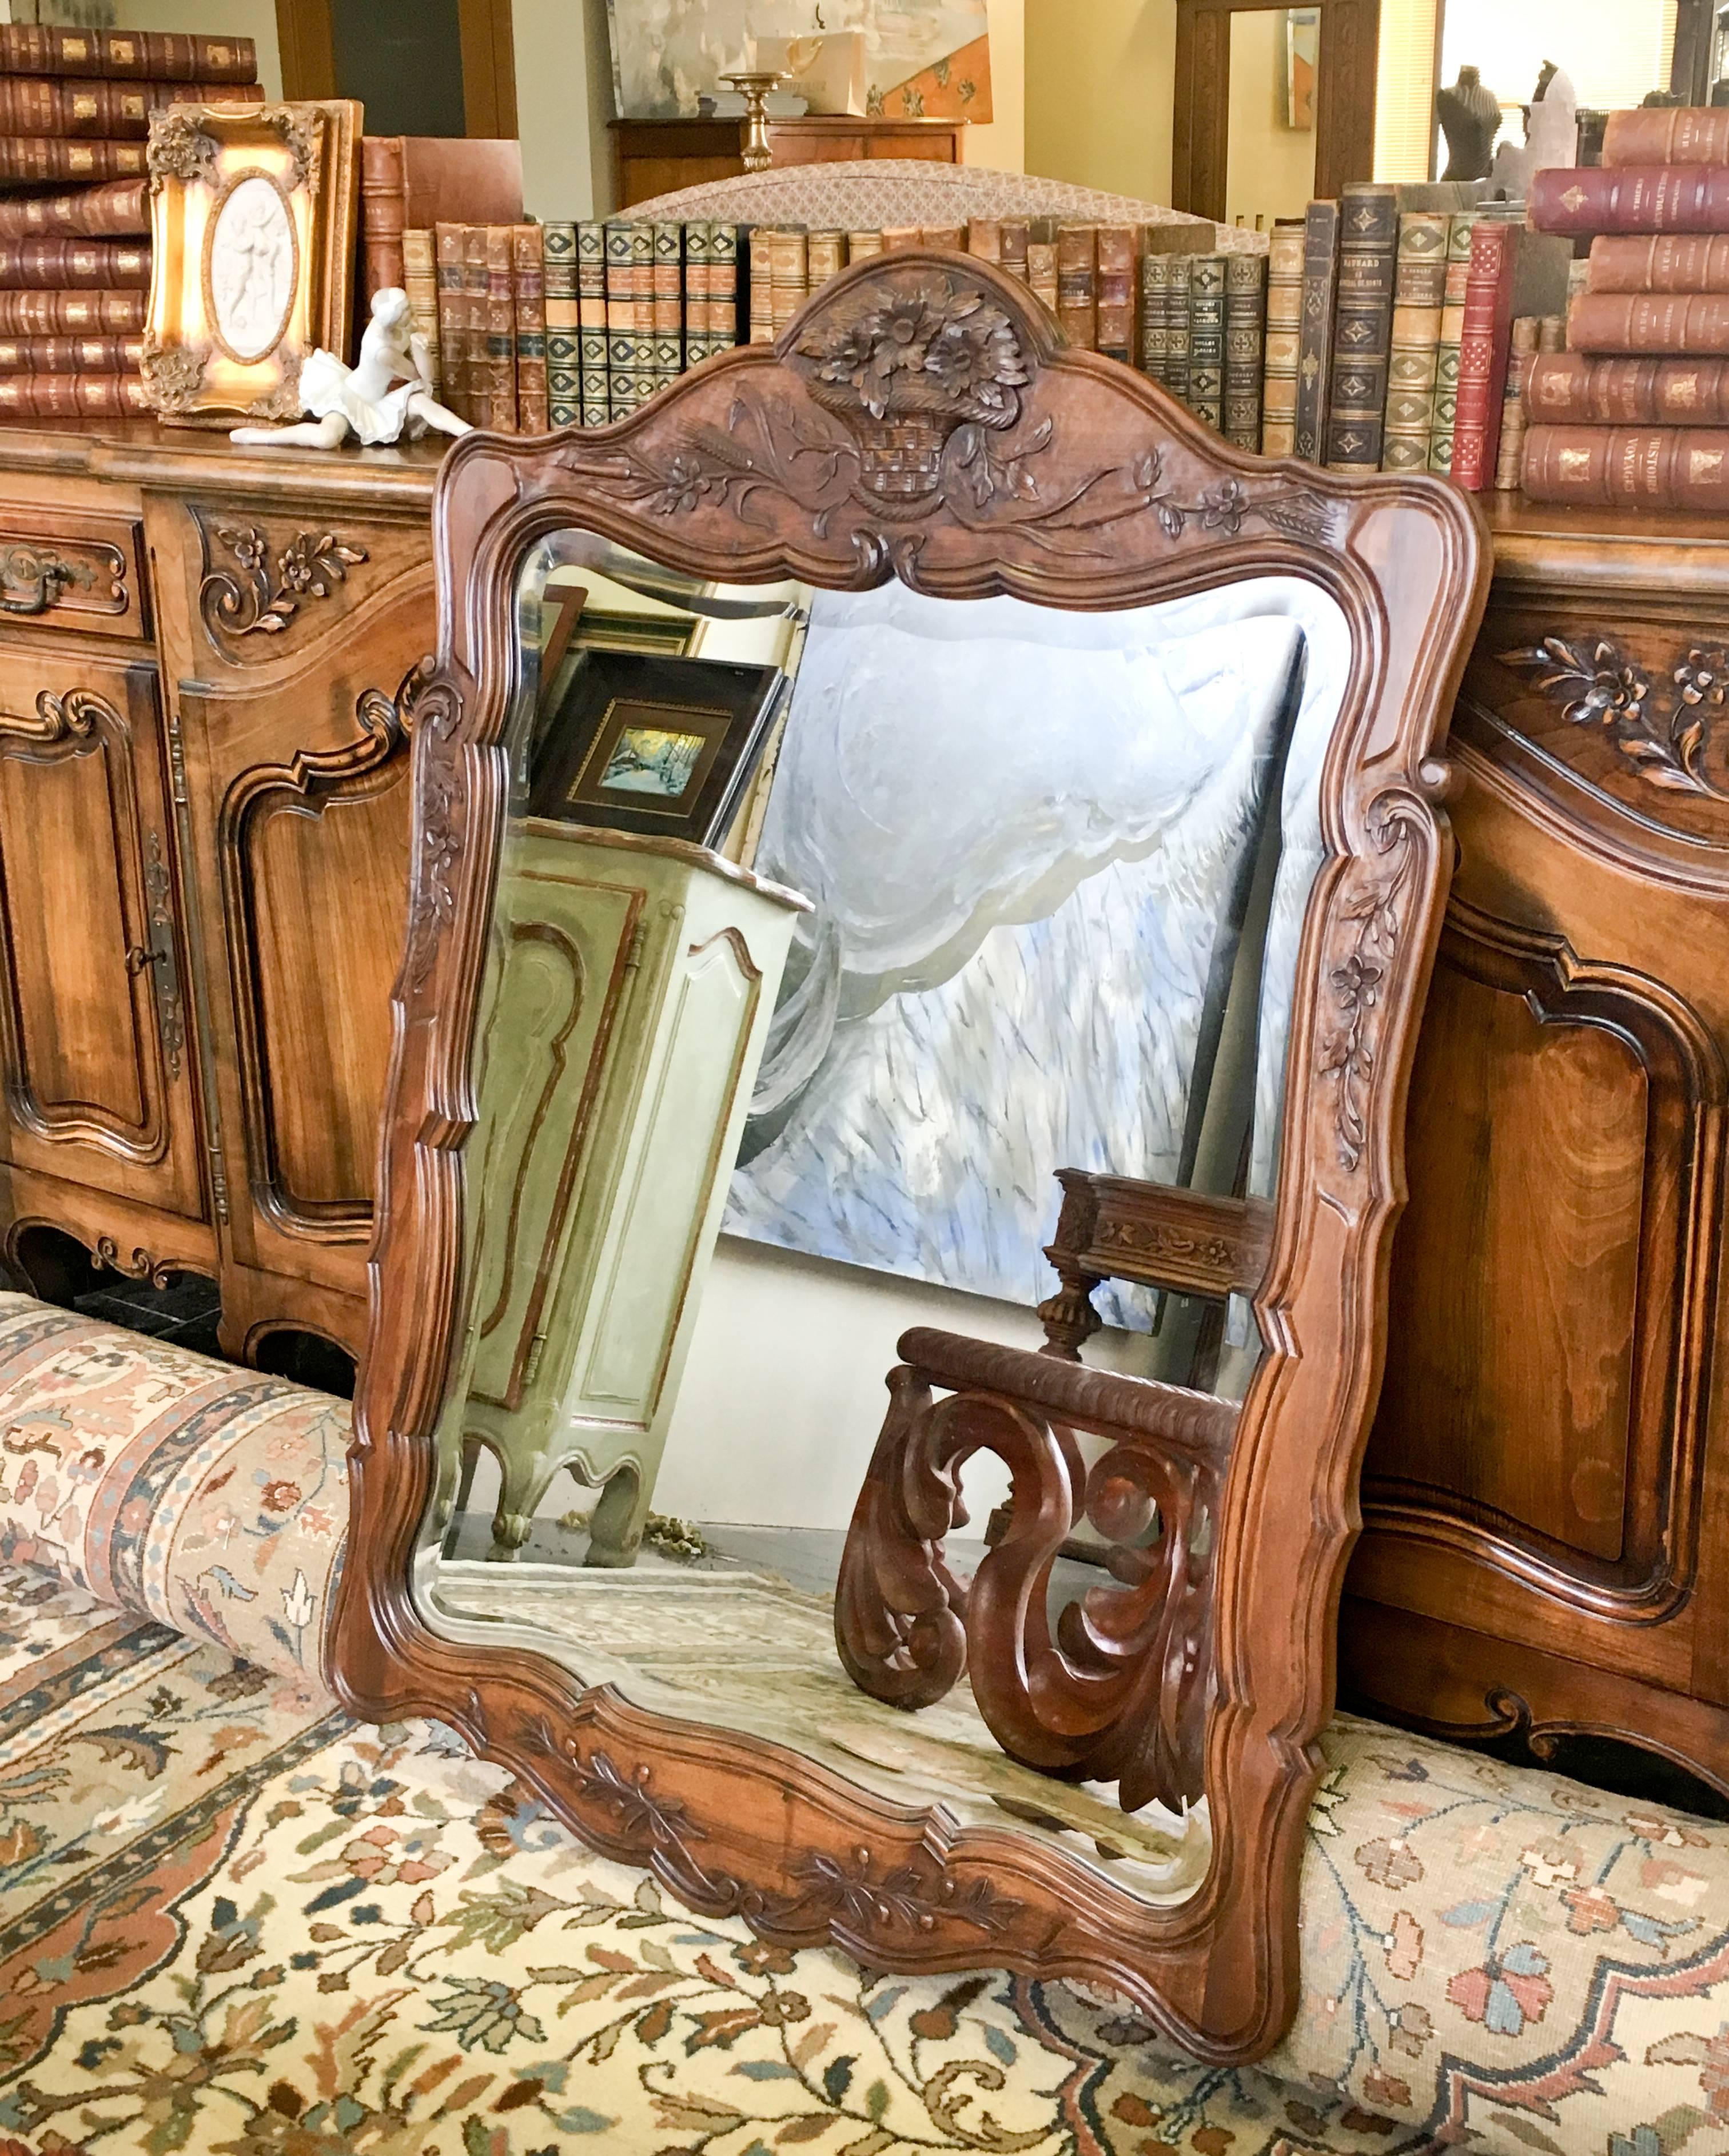 19th century walnut hand-carved large mirror in Louis XV style, in natural color with rich floral decoration. Original crystal glass and very good condition.
France, circa 1880.